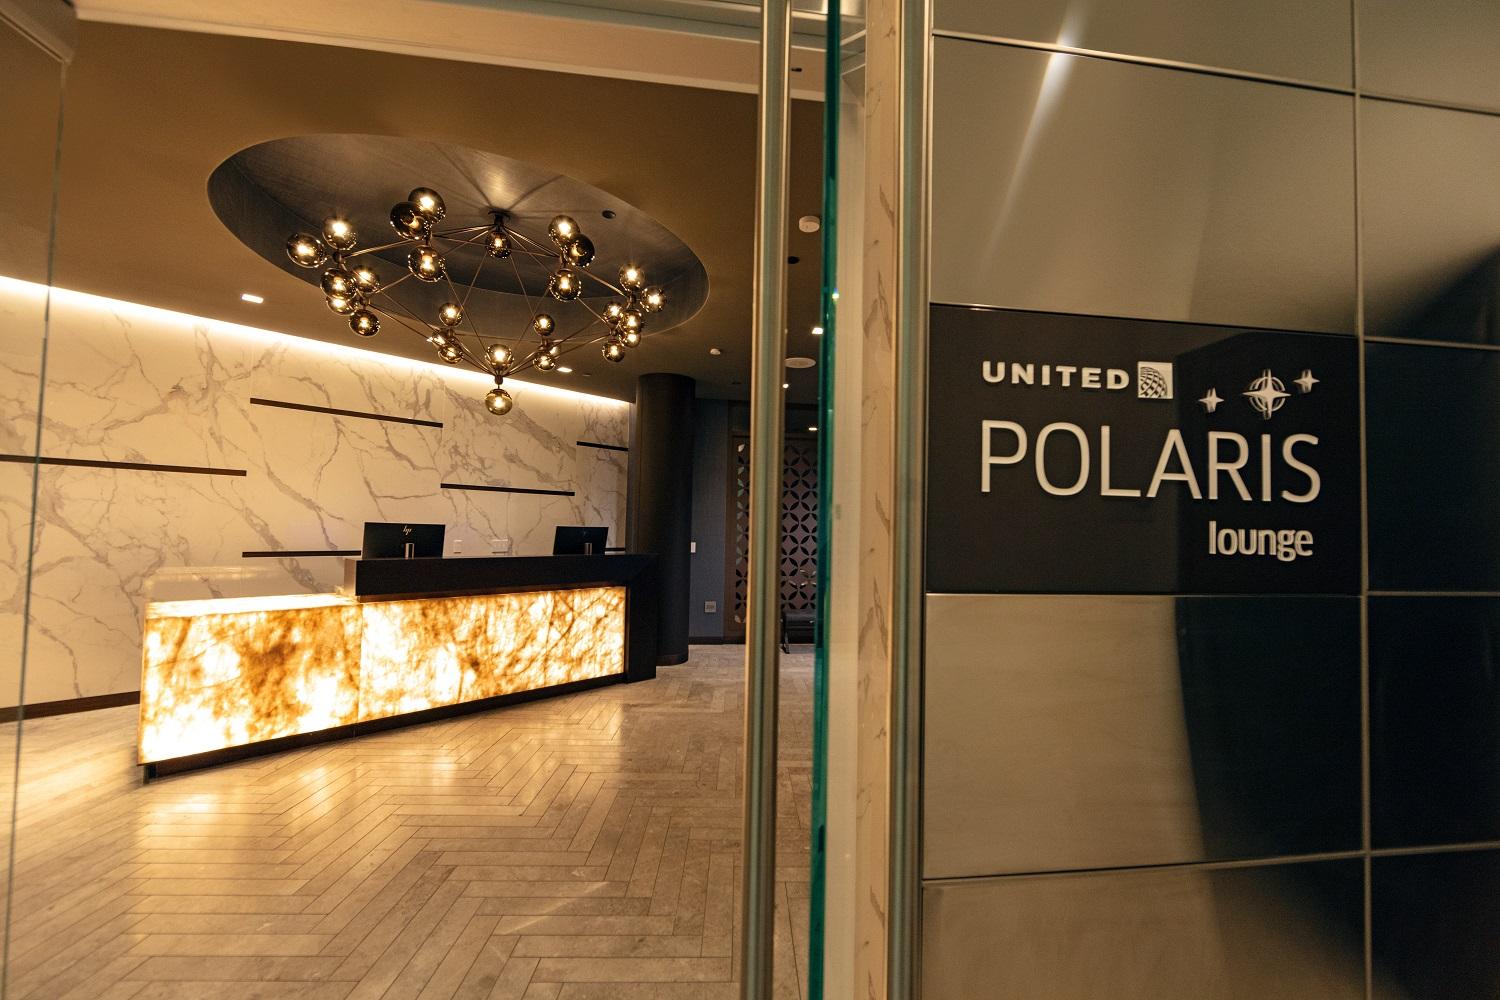 United Airlines Polaris Lounge Logo - Now Open: United Airlines Polaris Lounge LAX!